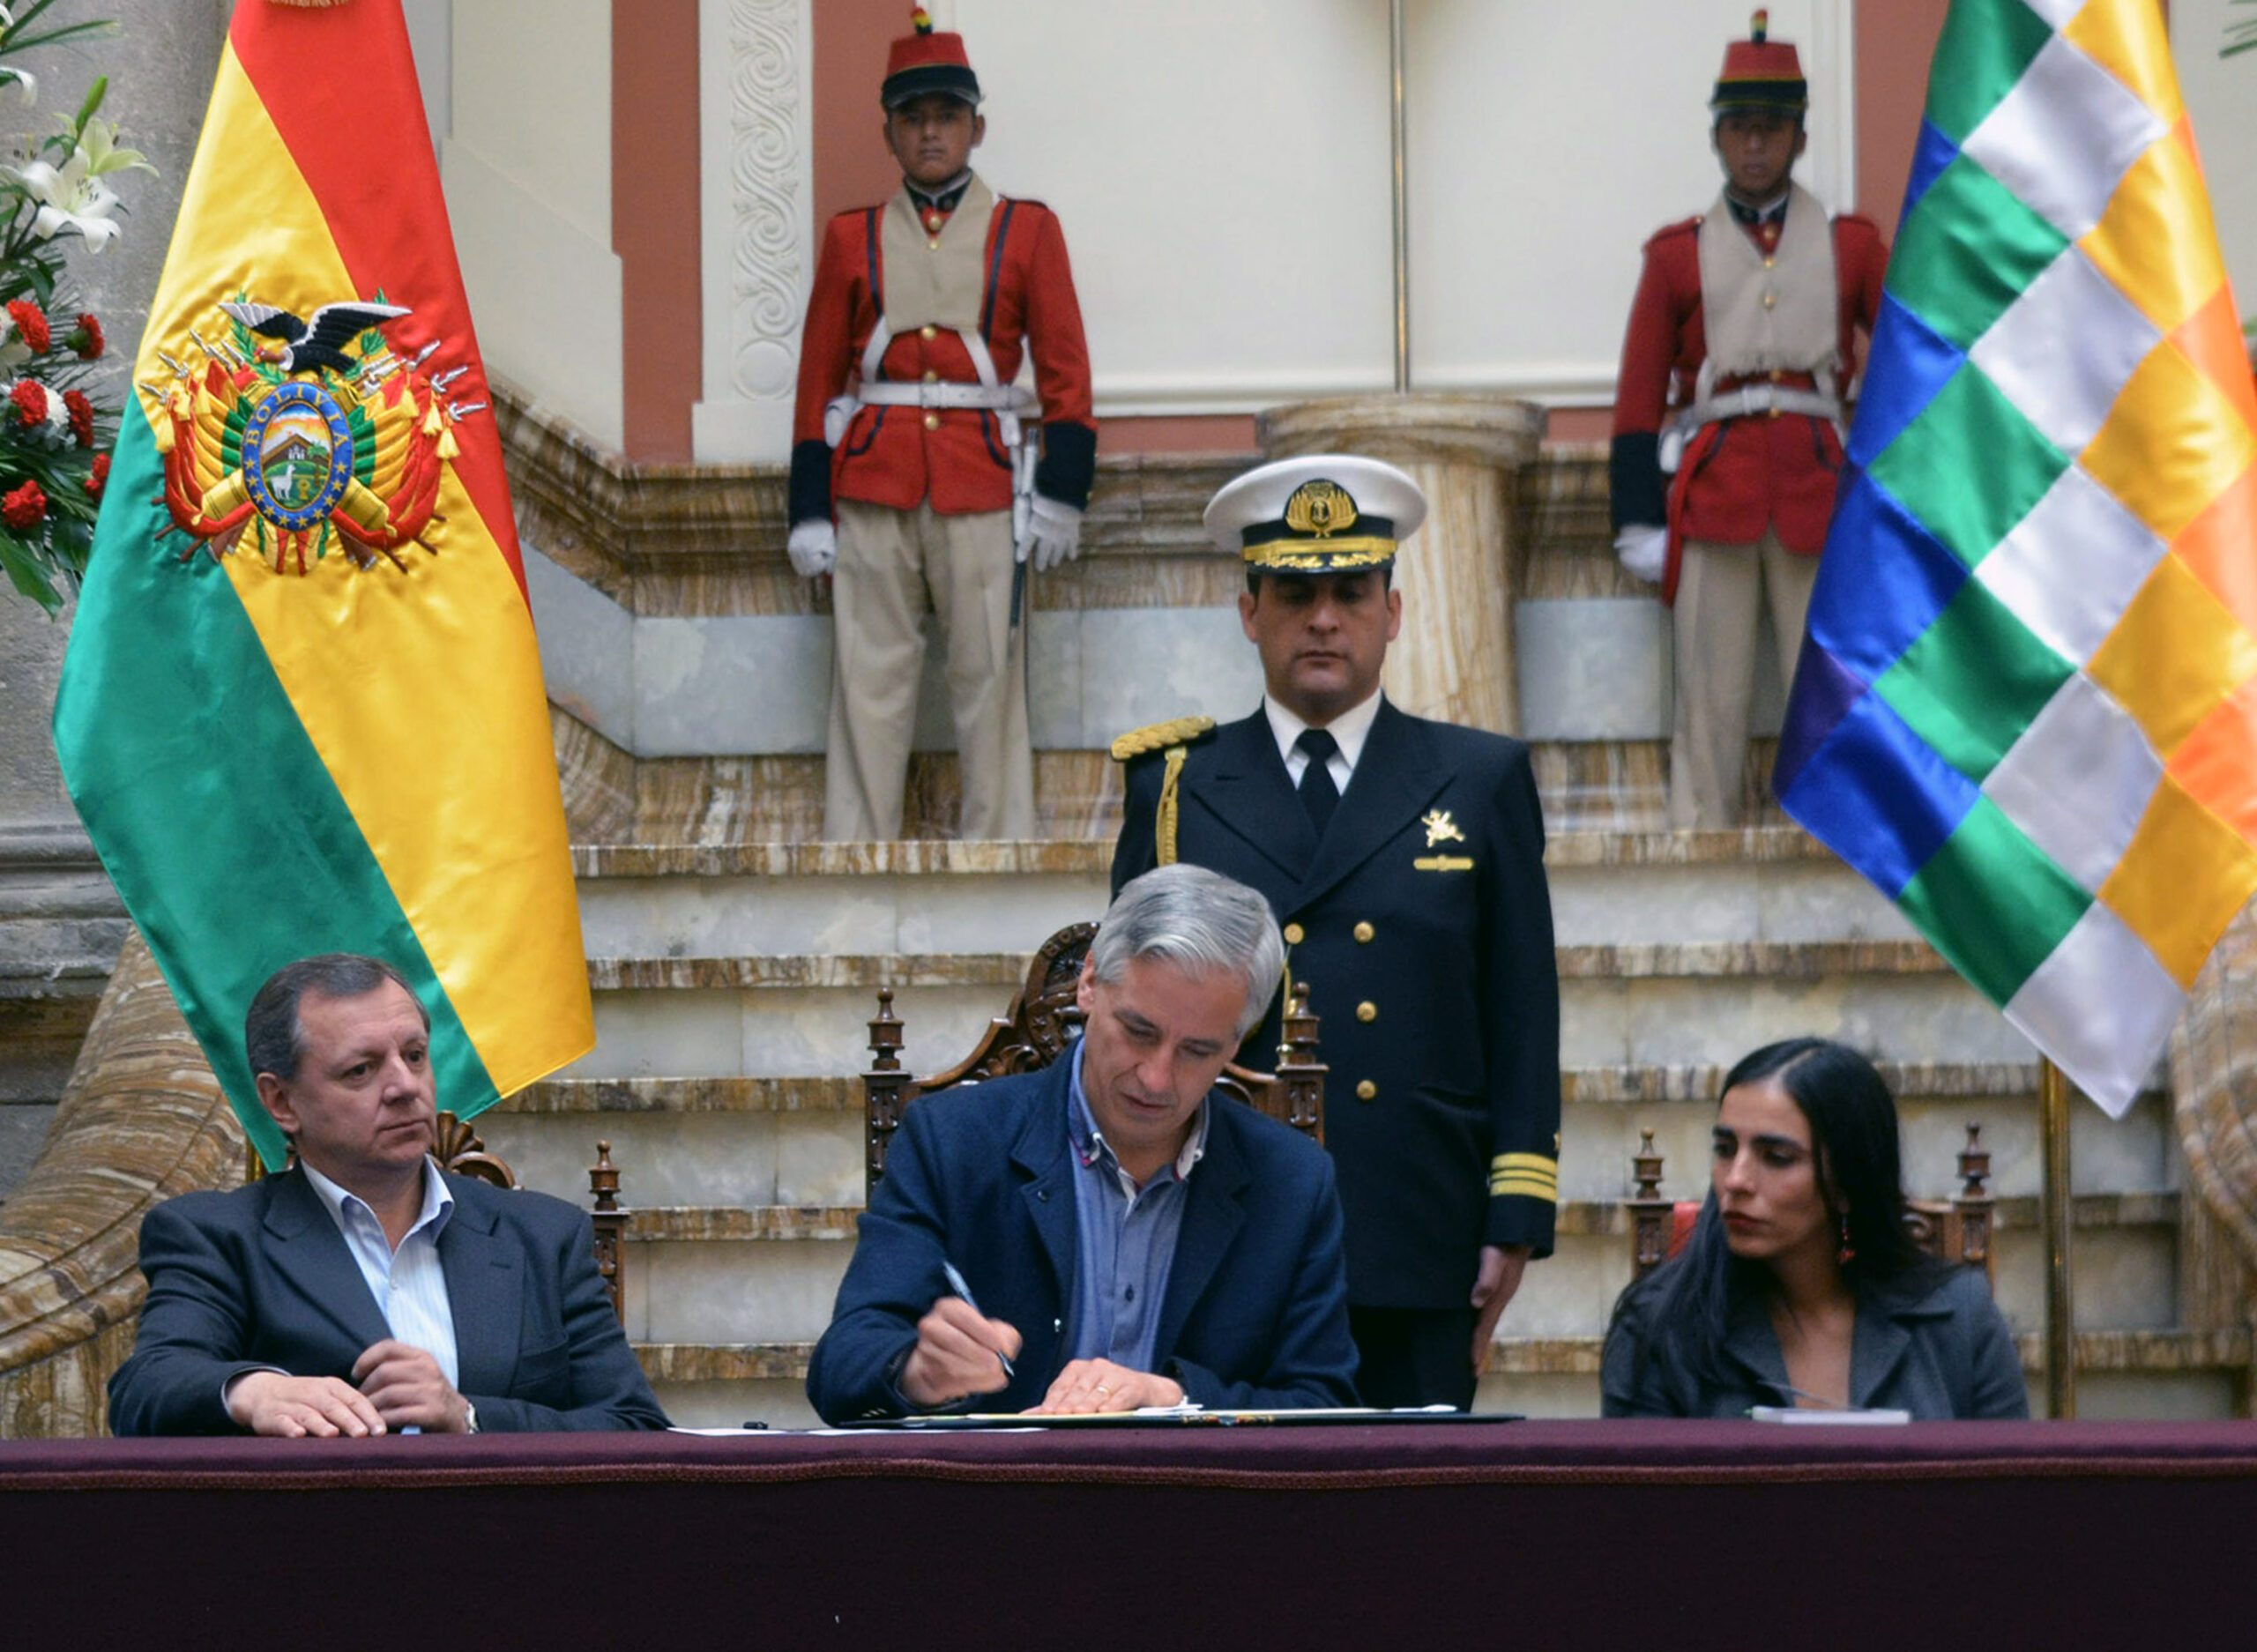 Bolivia enacts law letting transsexuals change ID documents